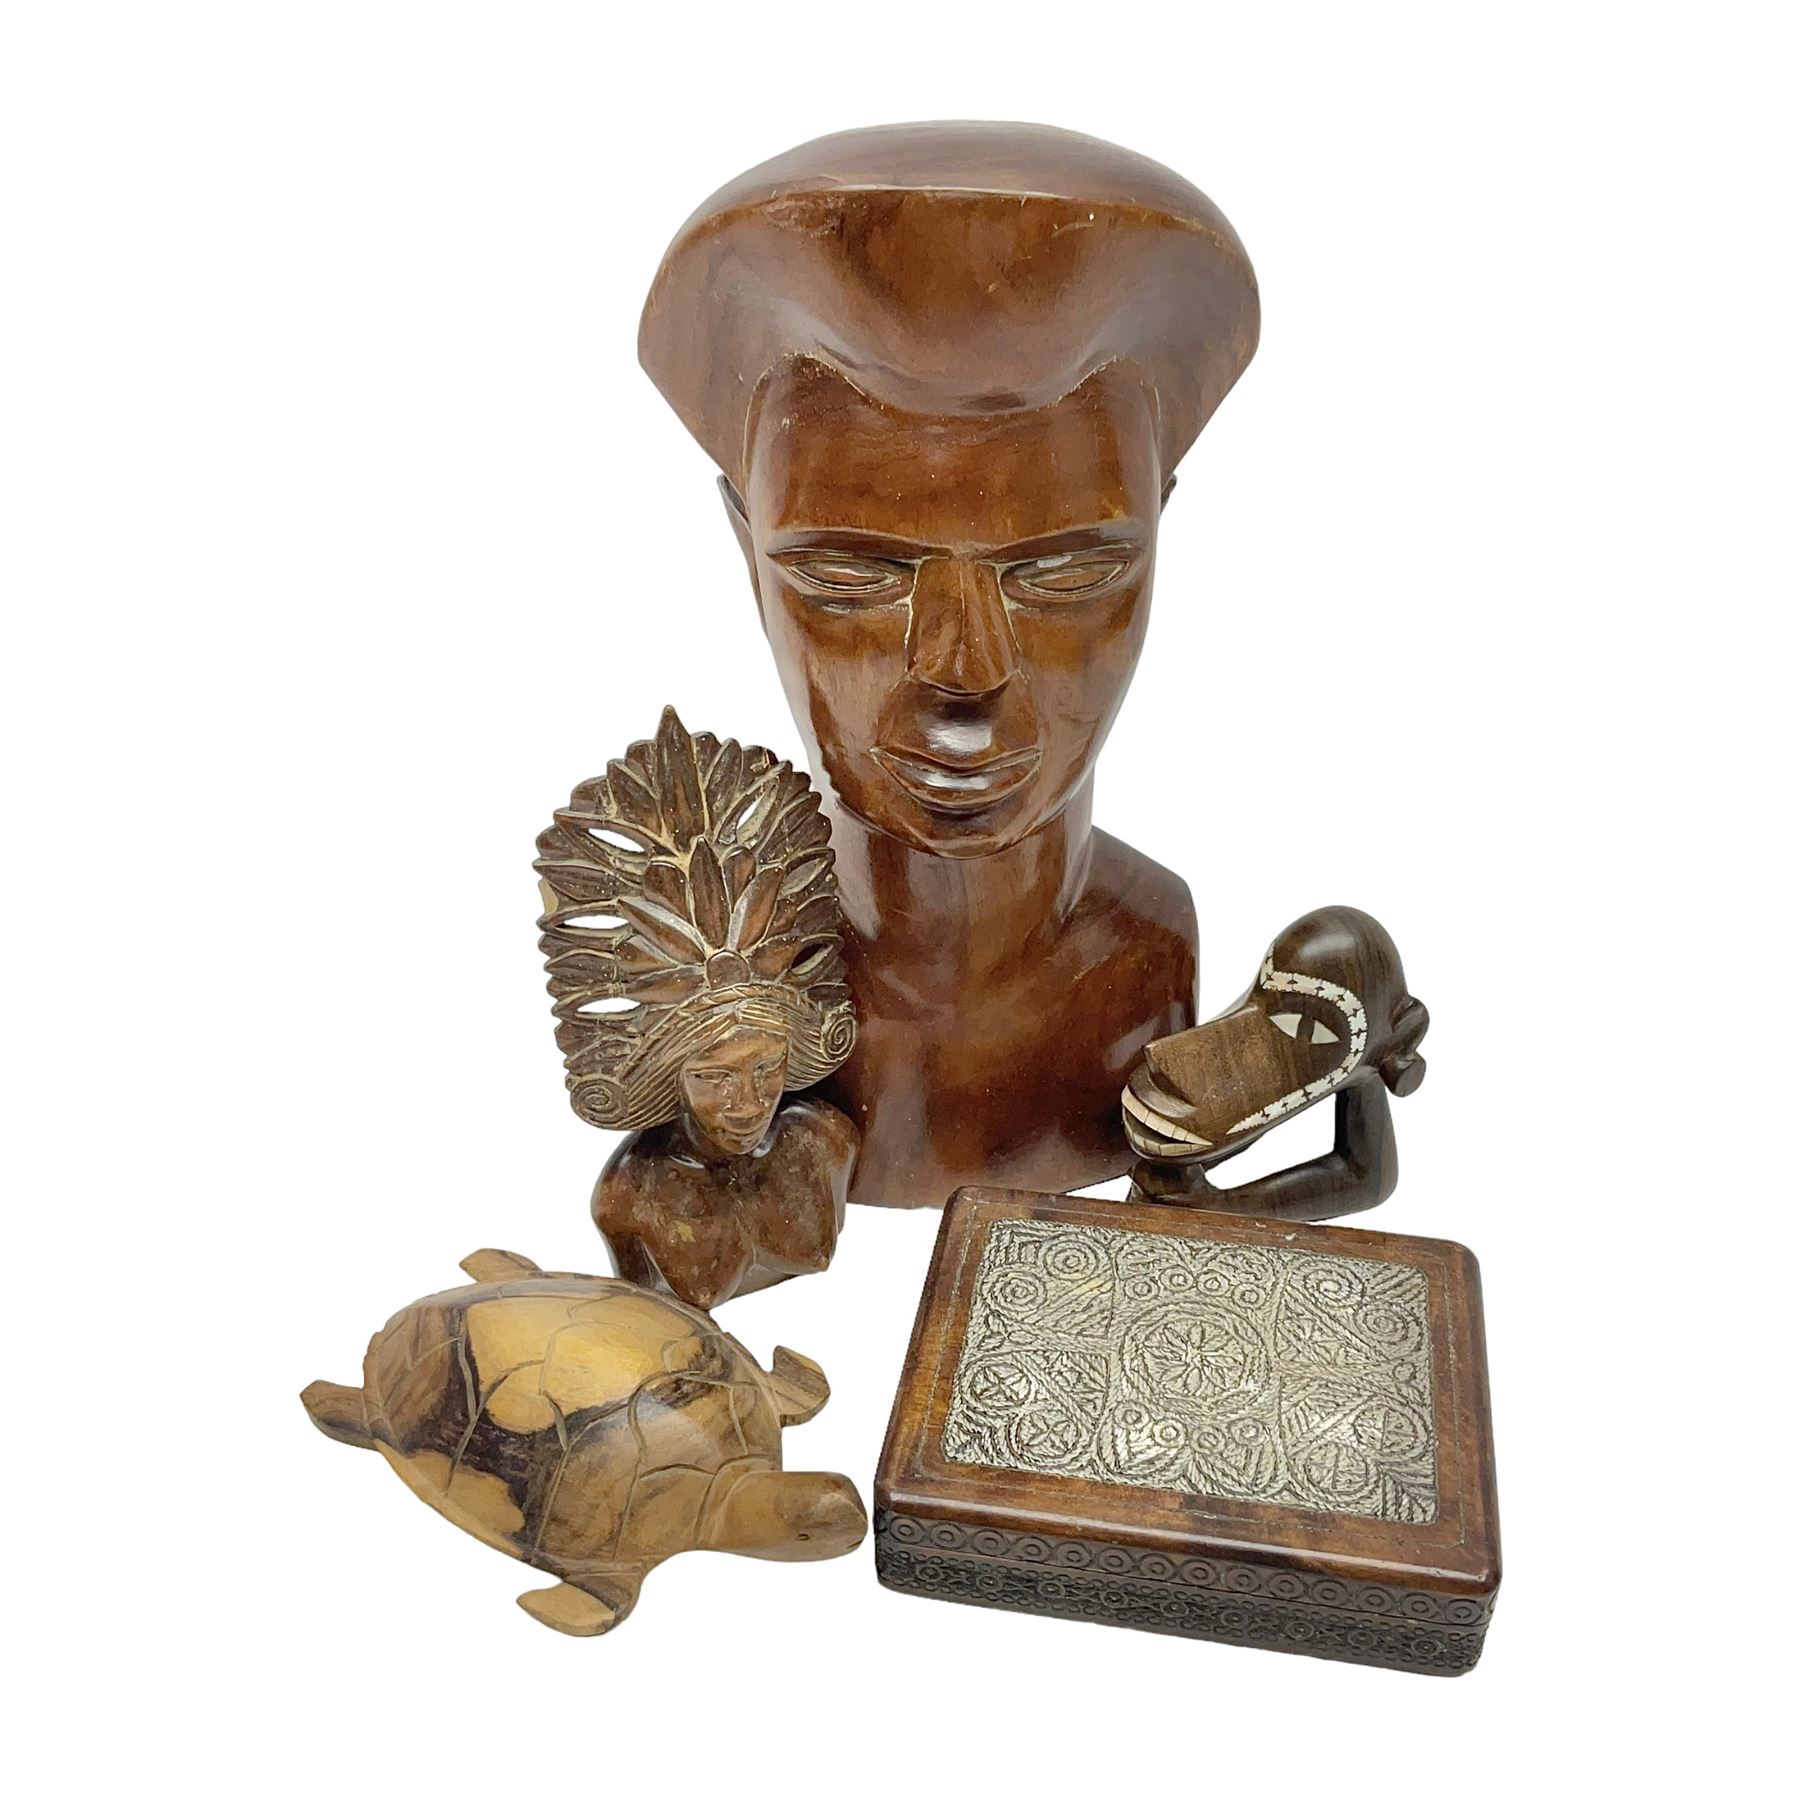 20th century wooden carvings from the Solomon Islands